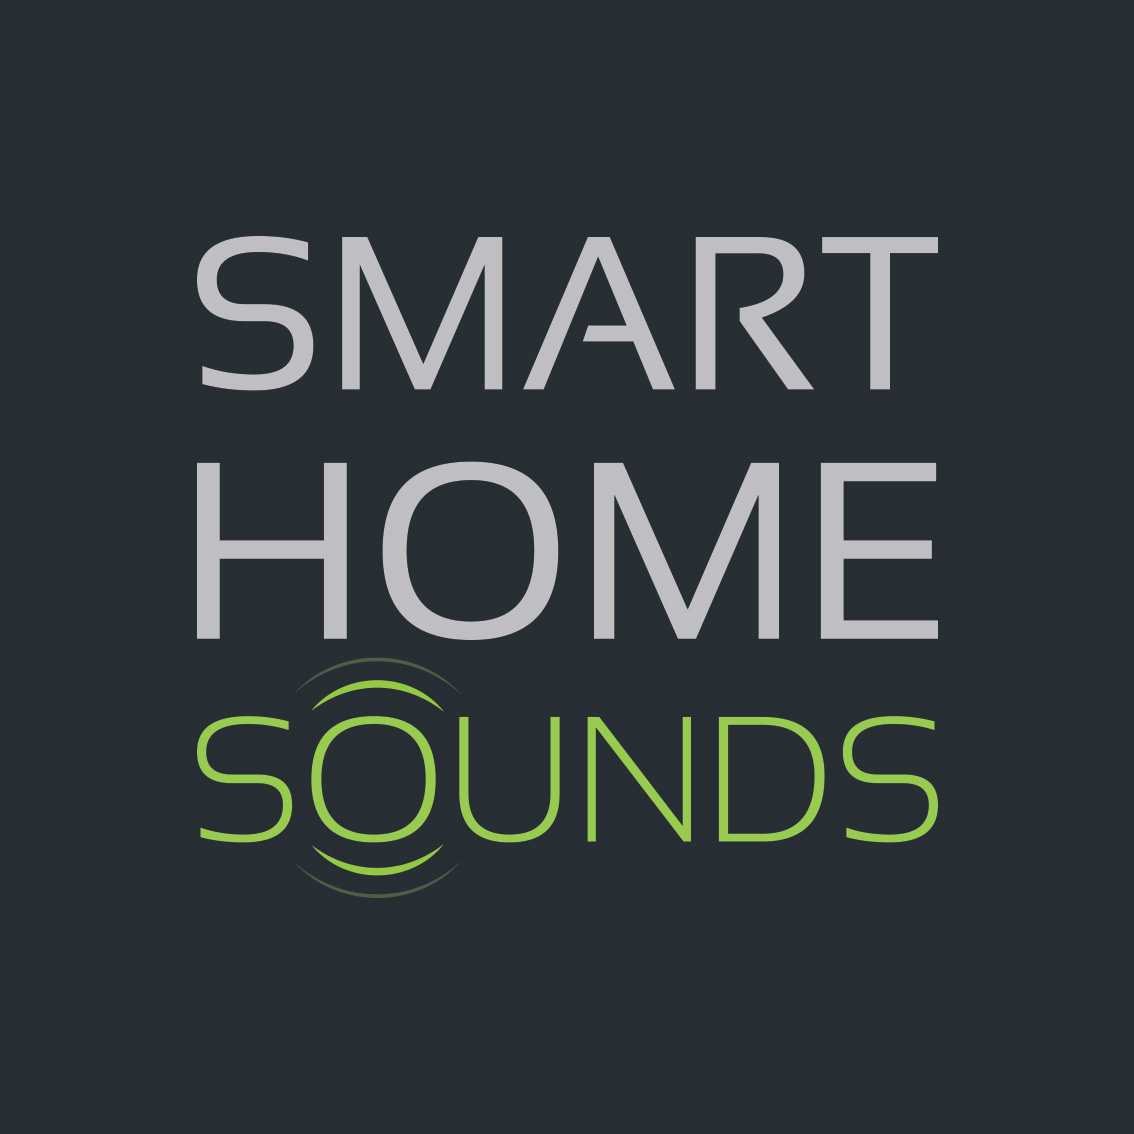 Black Friday: Save Up To 40% at Smart Home Sounds